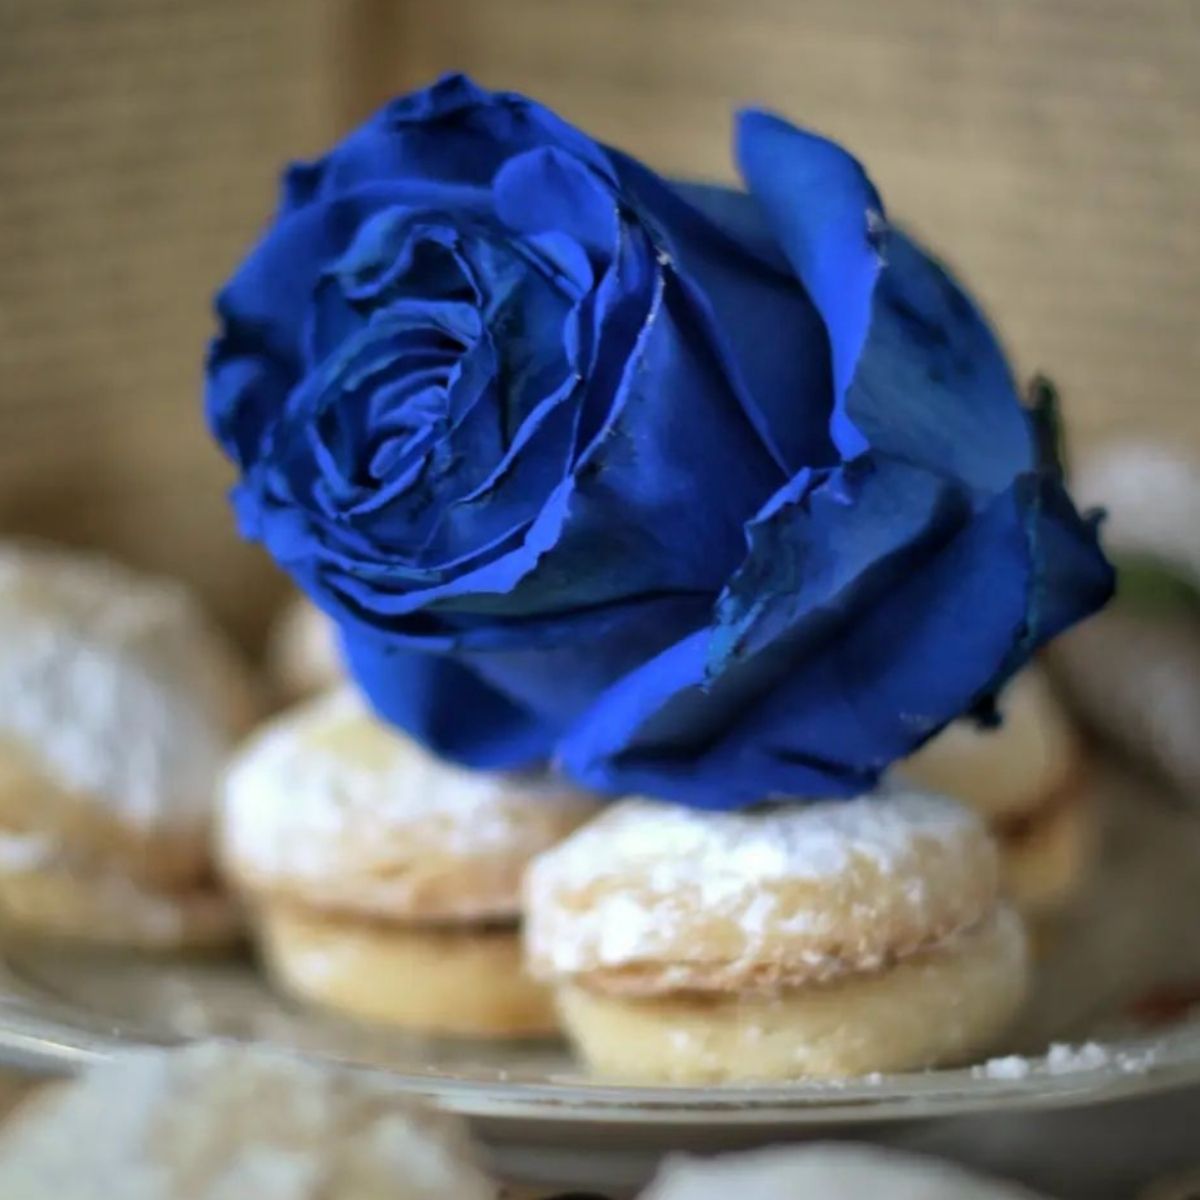 Do Blue Roses Exist - Are There Any Real Blue Roses? - Article on ...